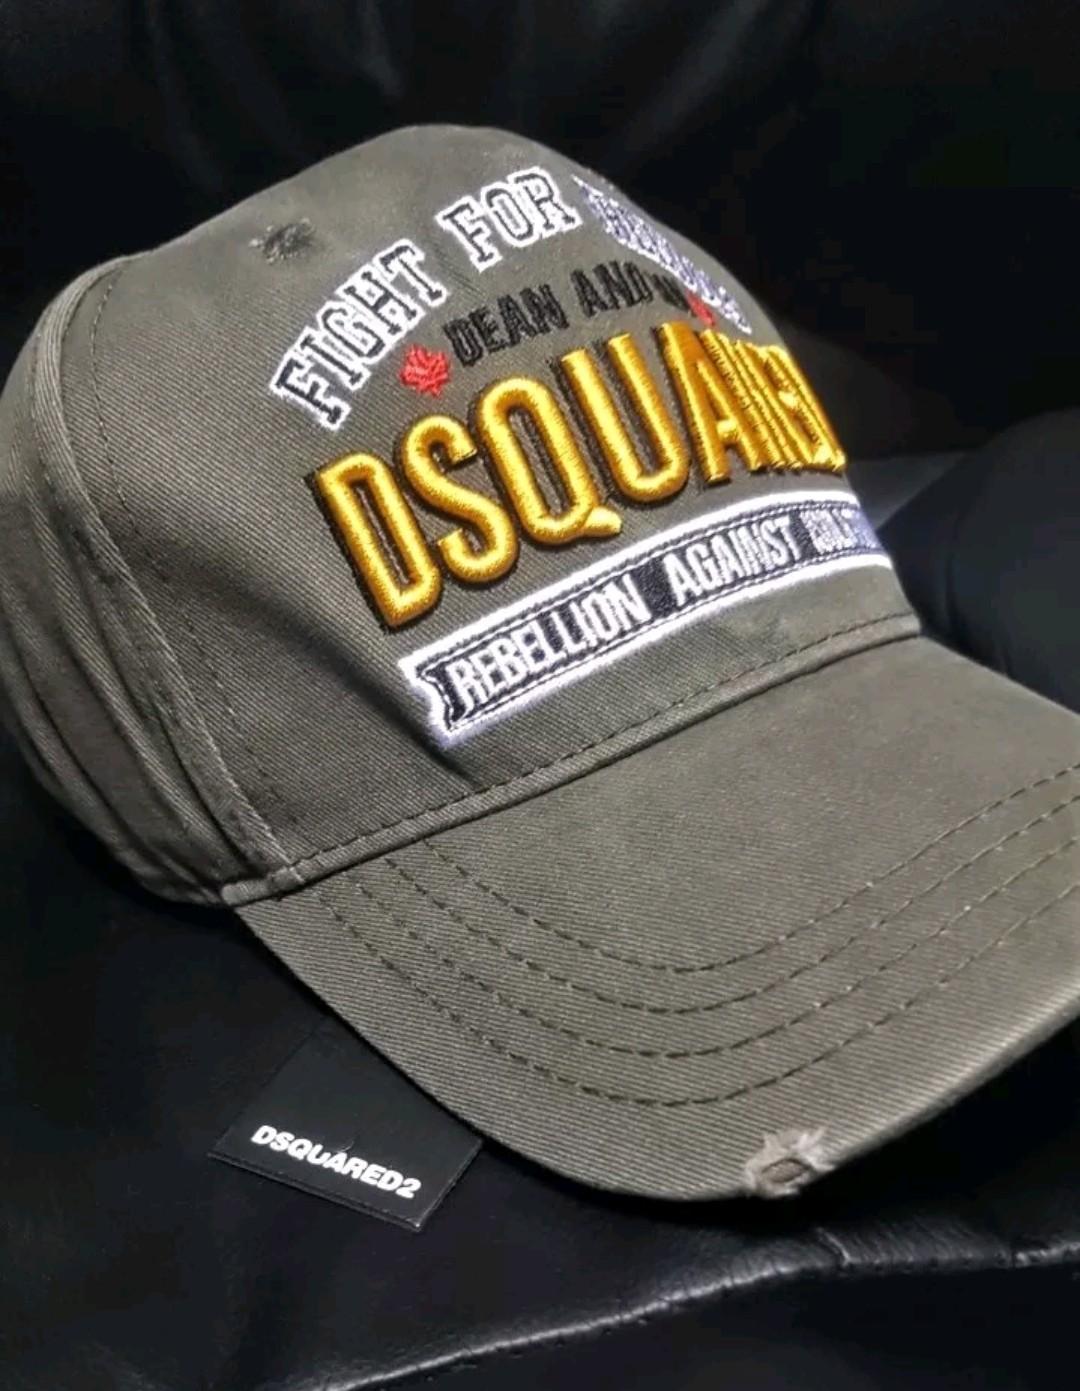 dsquared cap killers on the loose